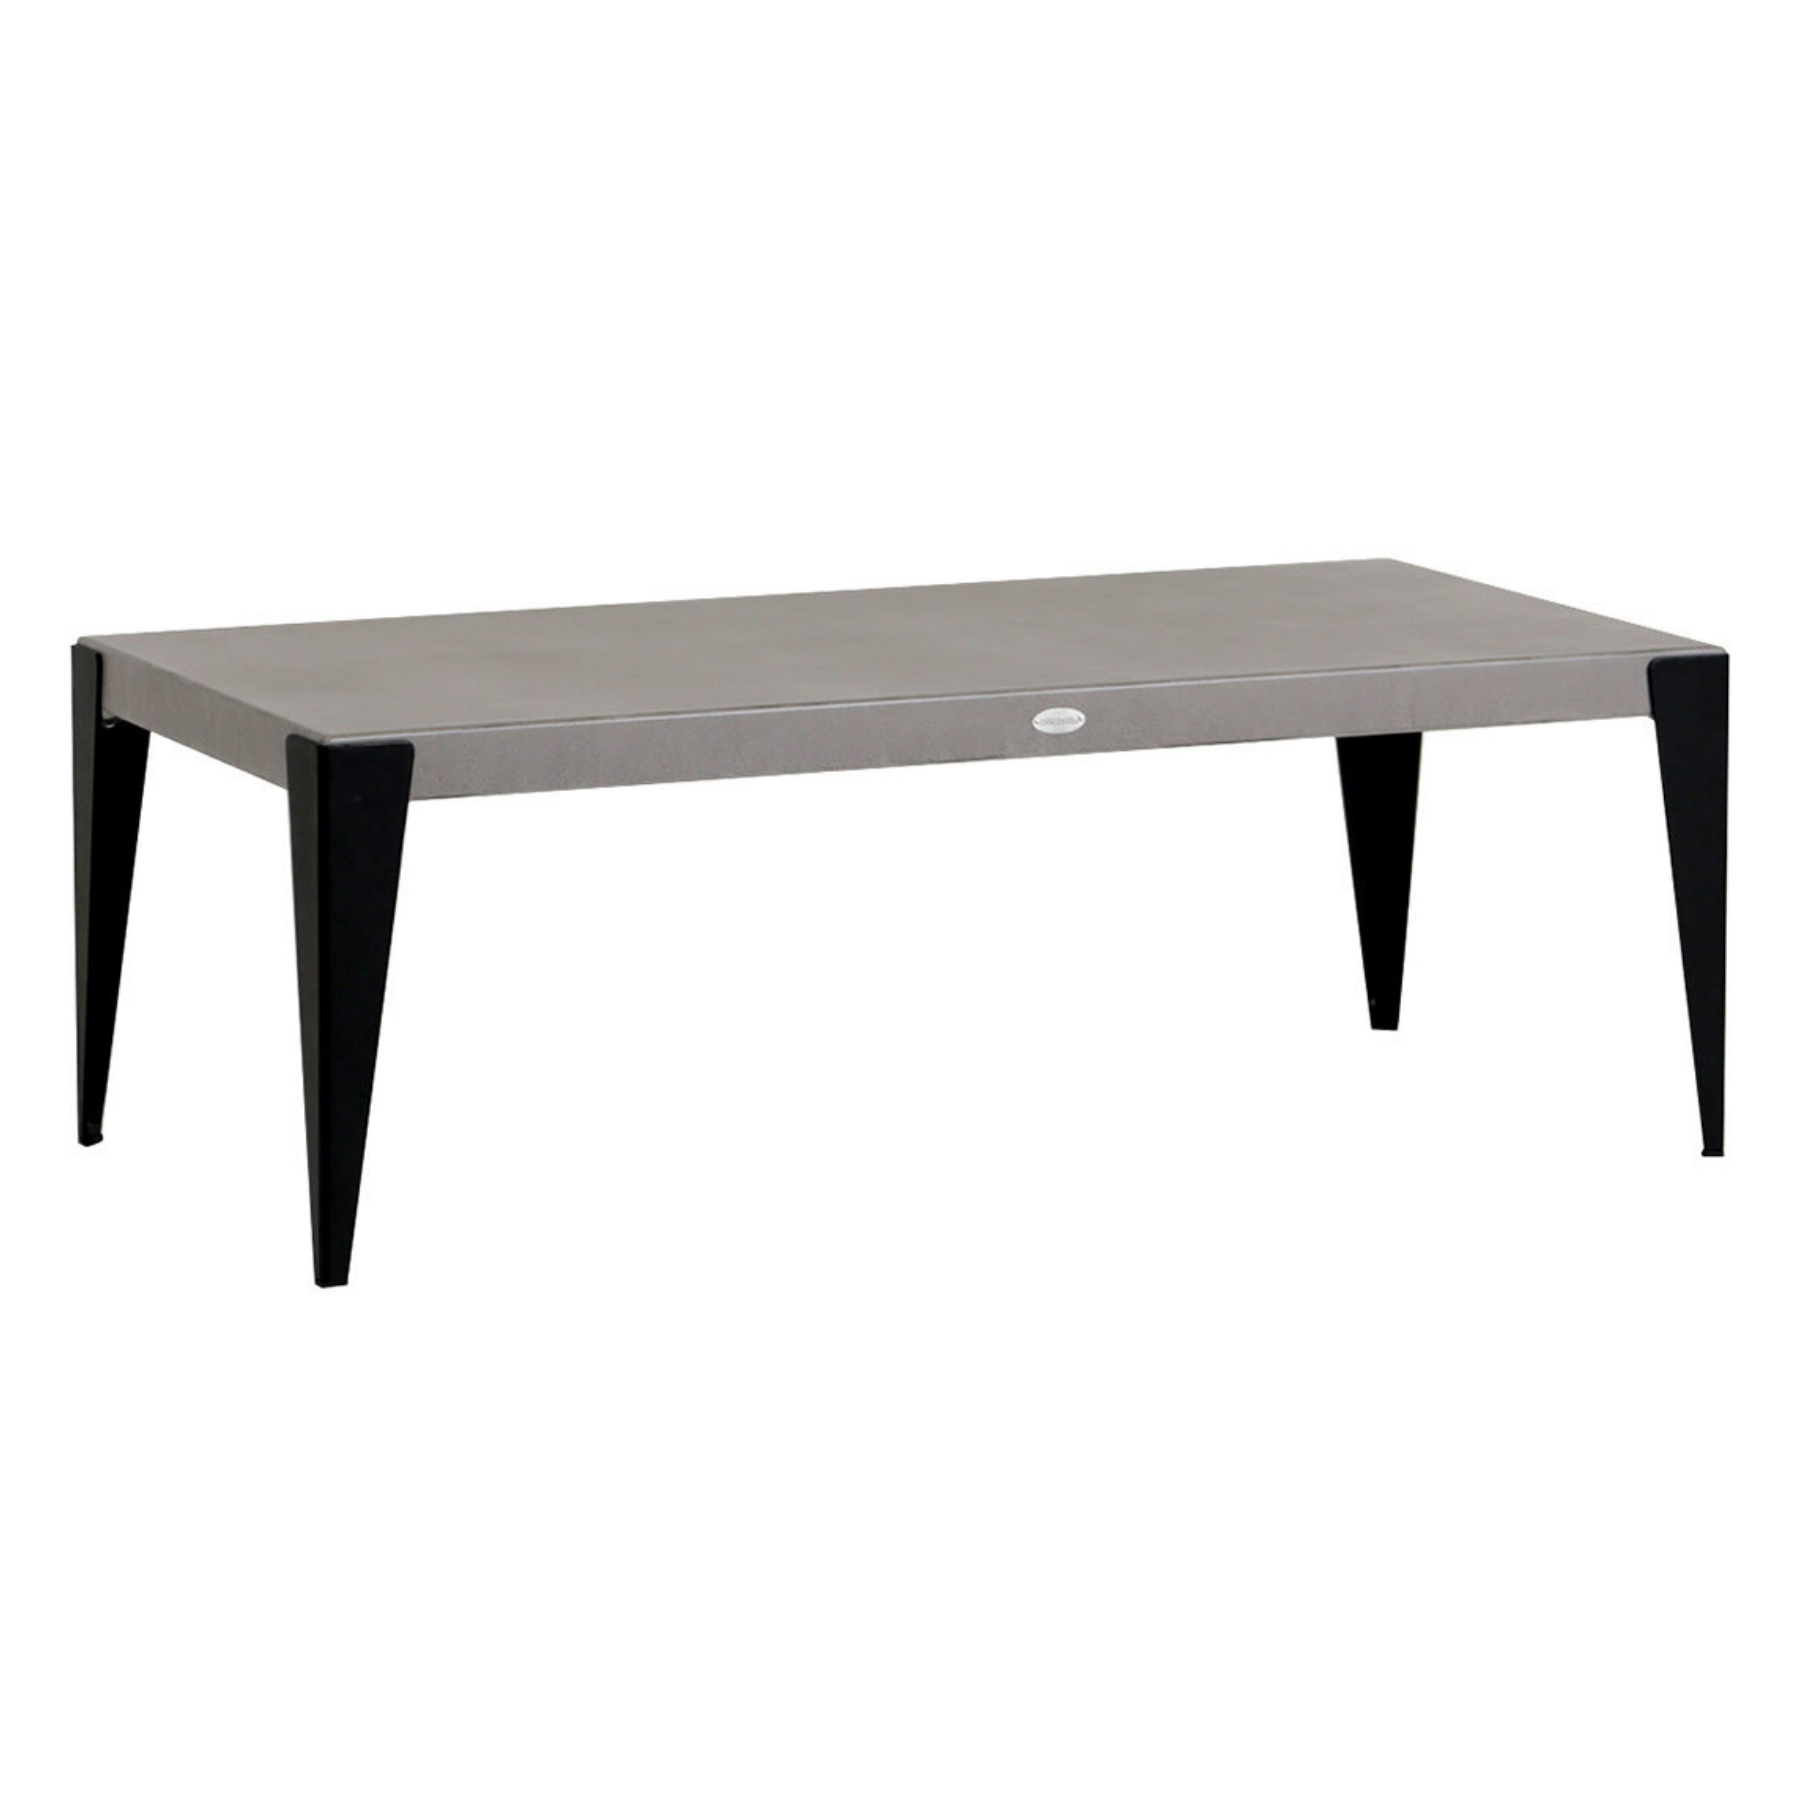 Genval Coffee Table